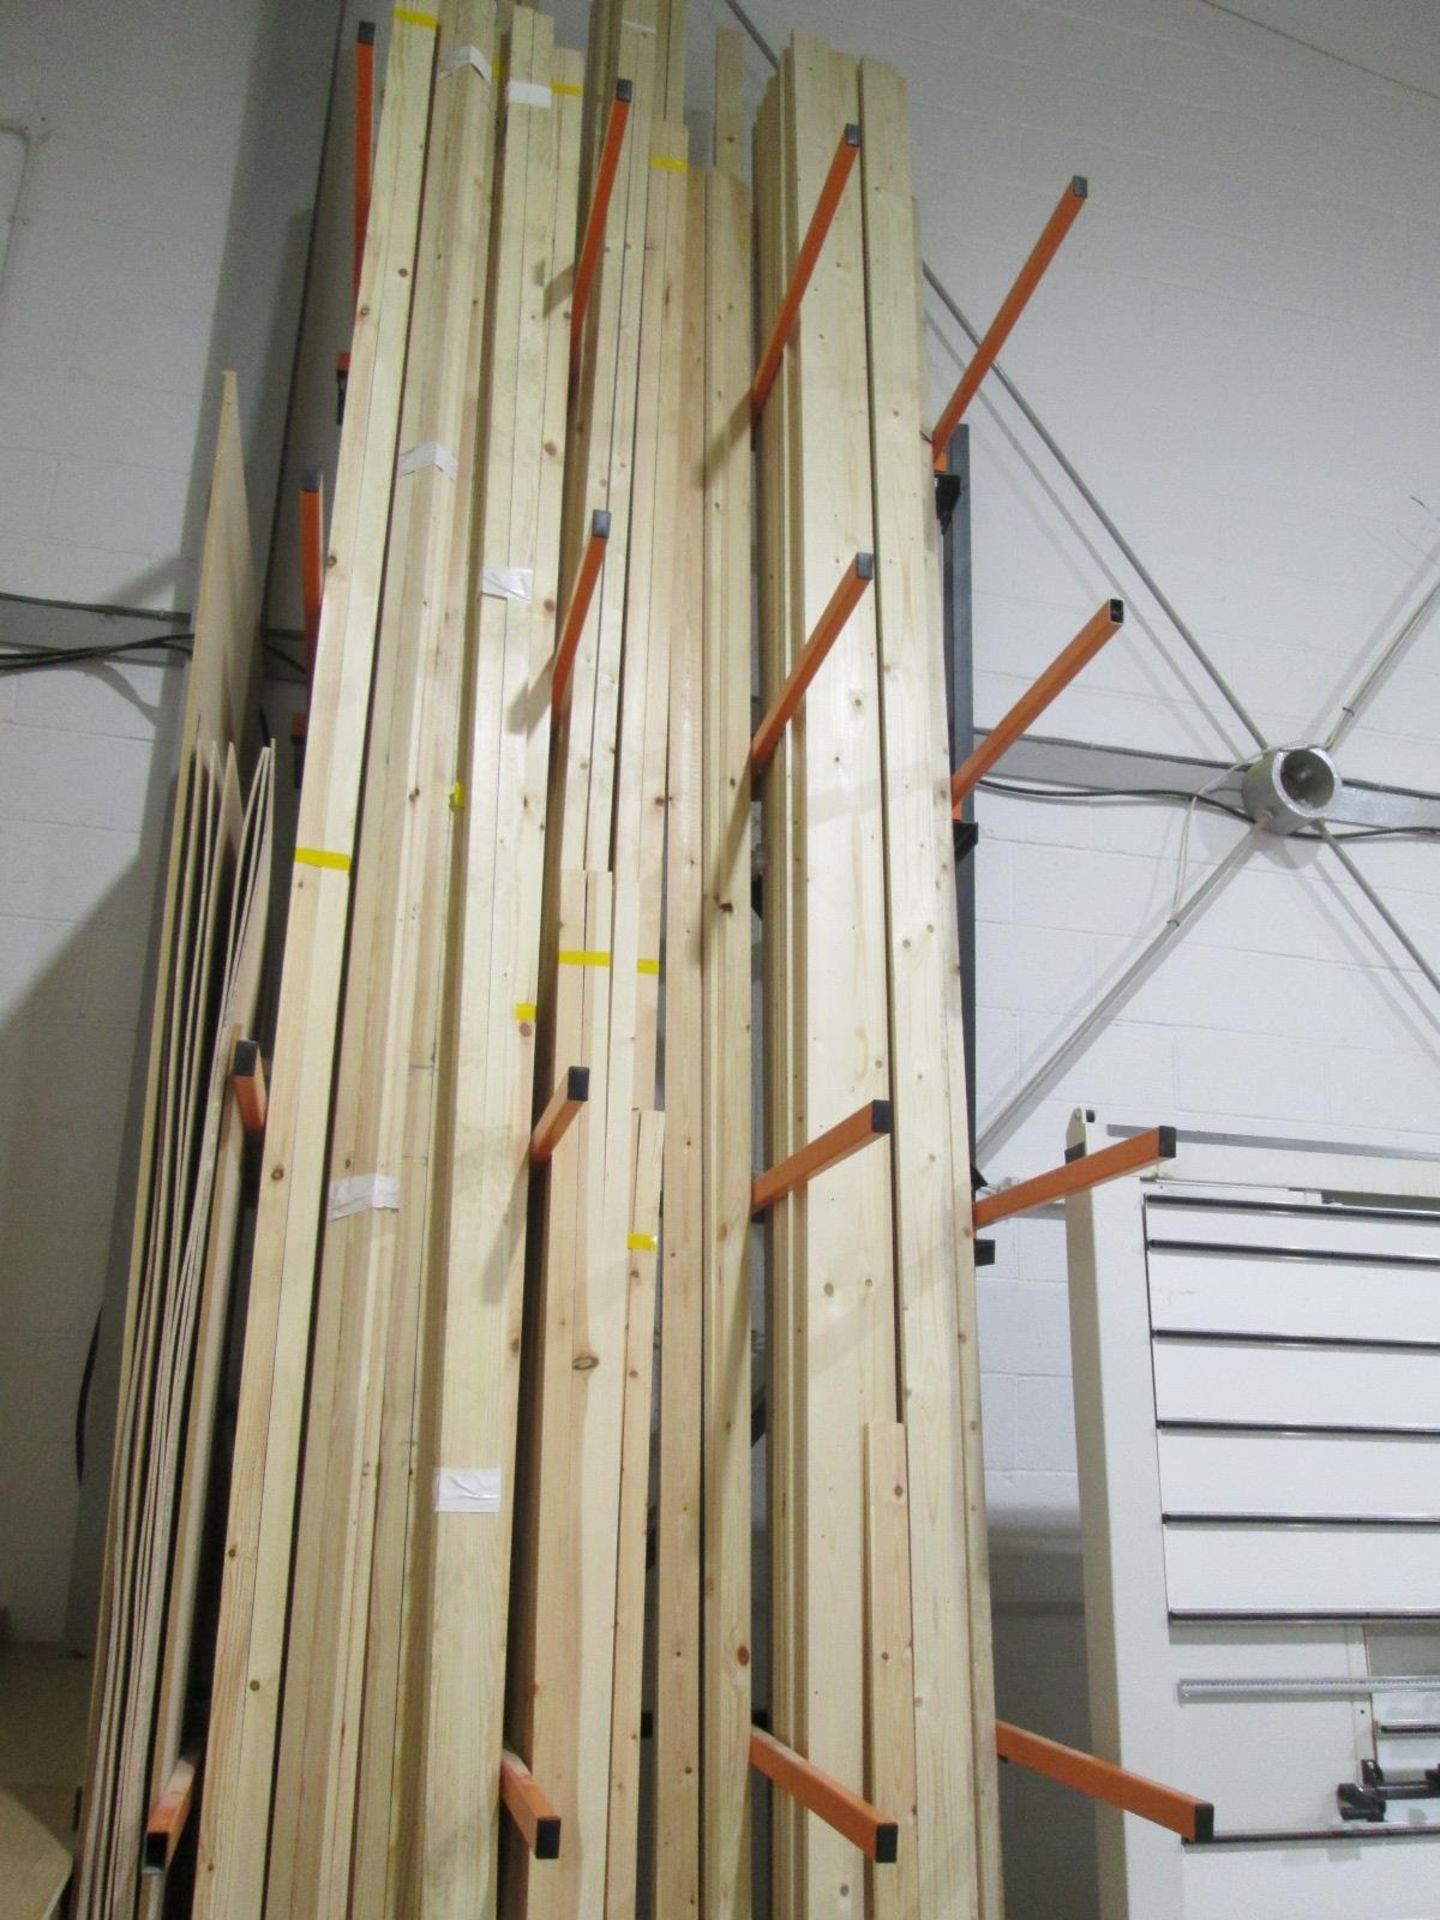 Various Quantity of Planed Timber in Lenghts, 3x1", 2x1" & 2x2" planed timber